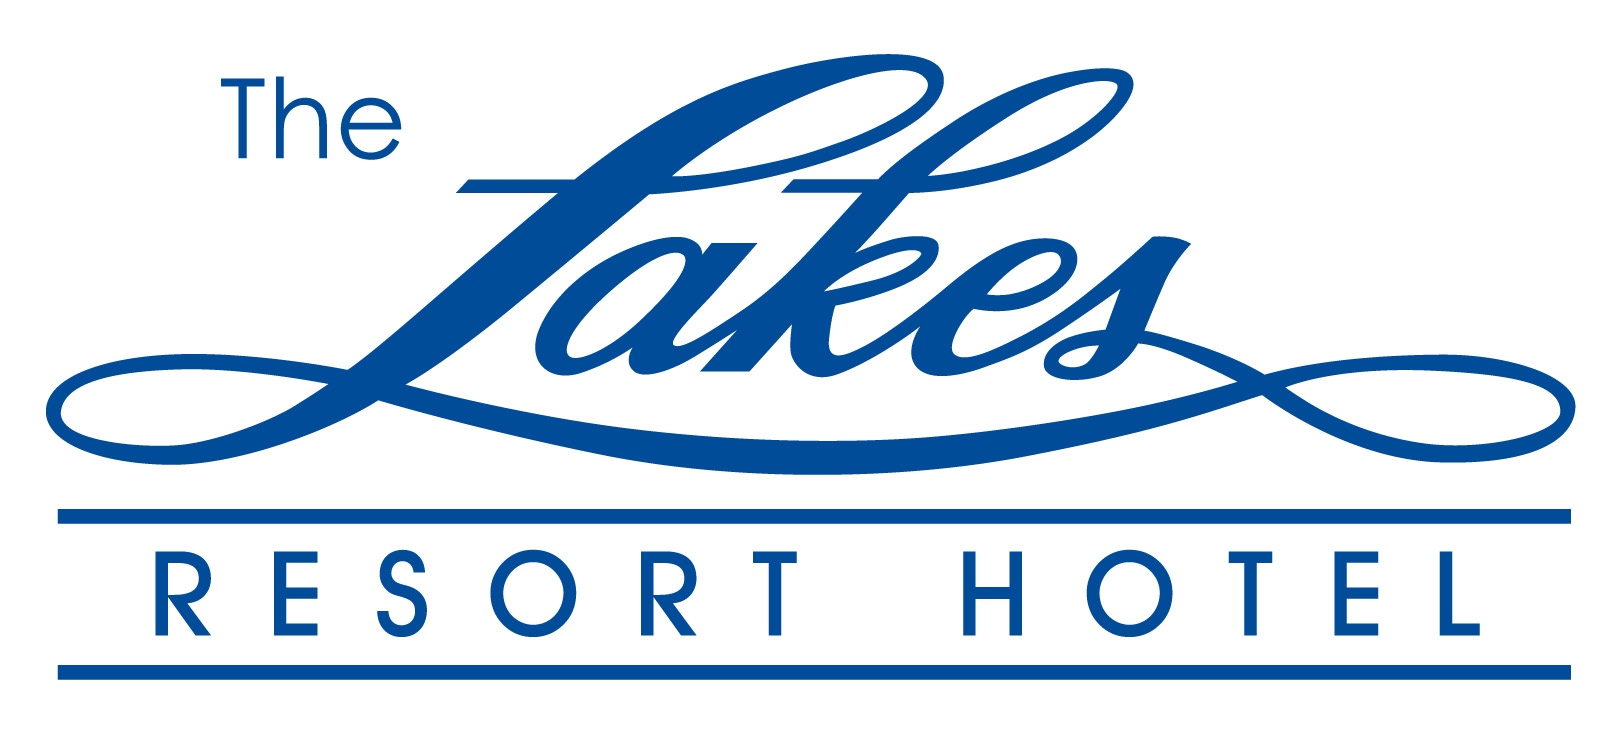 Lakes Resort Hotel - Coogee Beach Accommodation